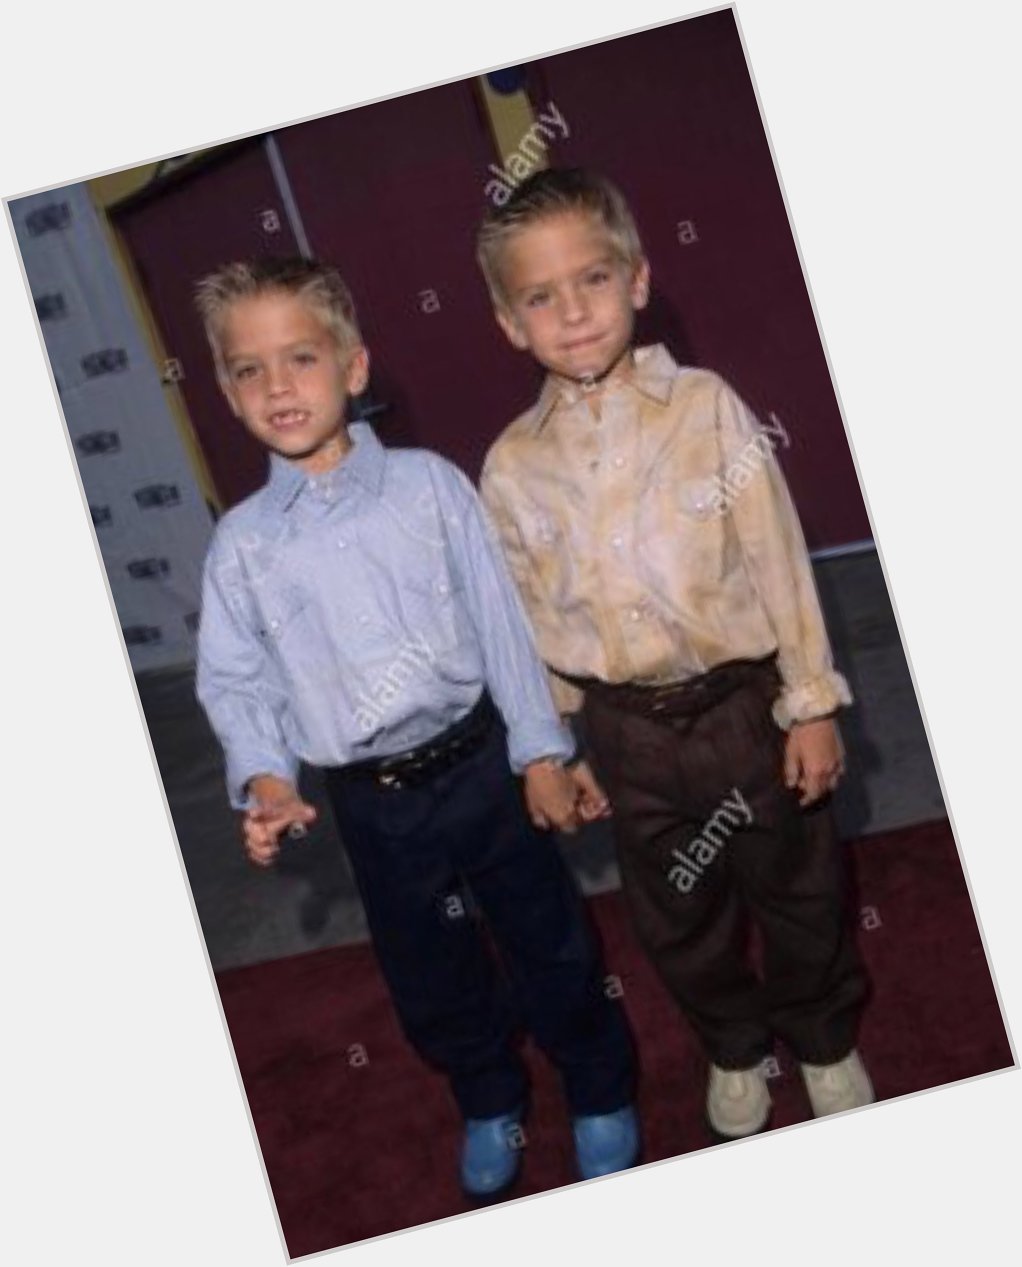 HAPPY BIRTHDAY COLE AND DYLAN SPROUSE      